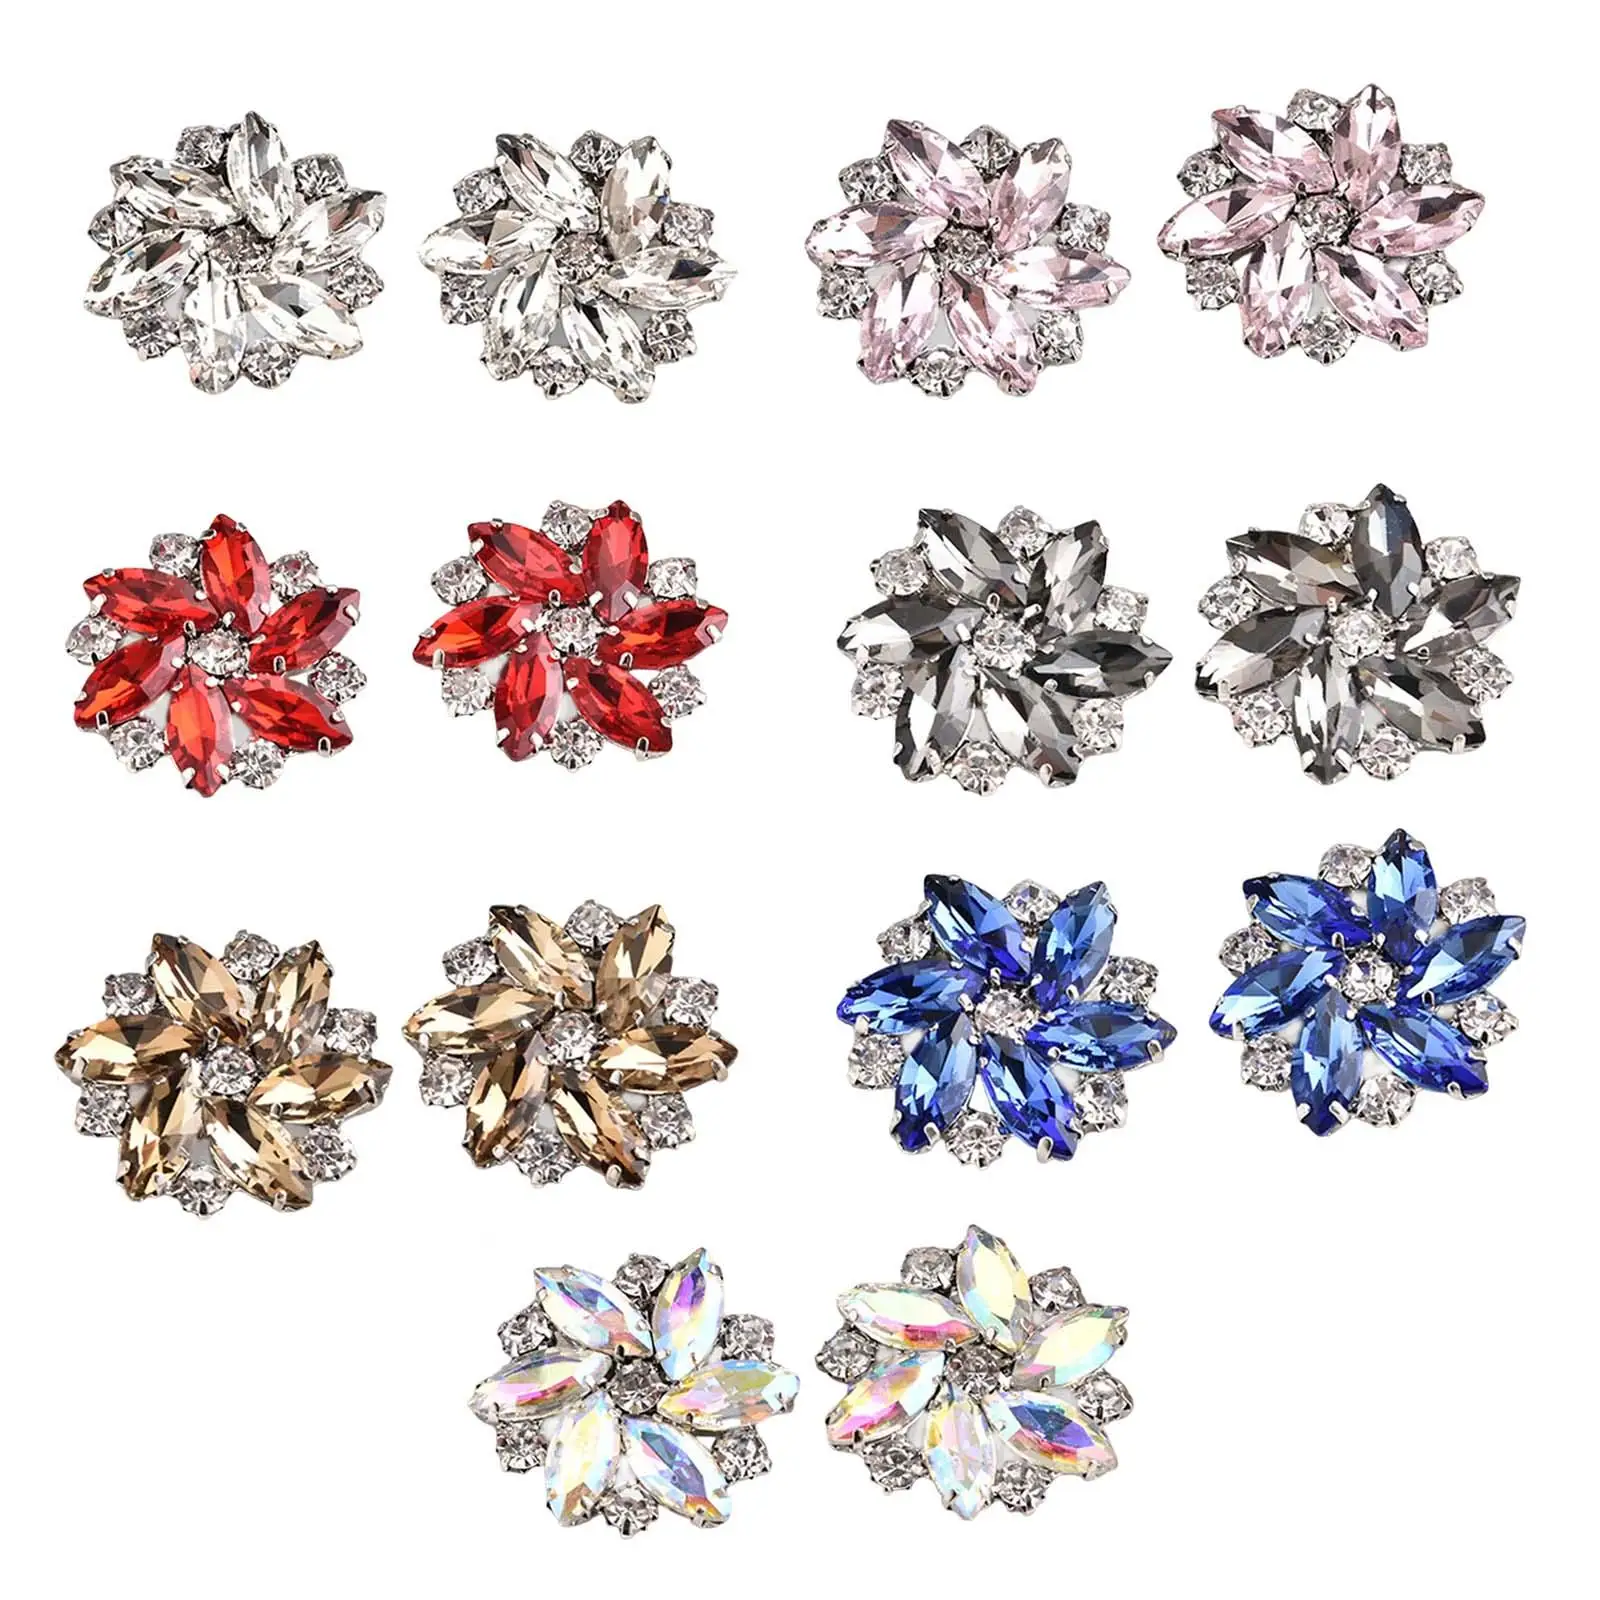 2x Rhinestone Shoe Clips Shoes Jewelry Decoration Wedding Crystal Shoe Buckle for Clothing Sandals Bakcpack Hair Accessories